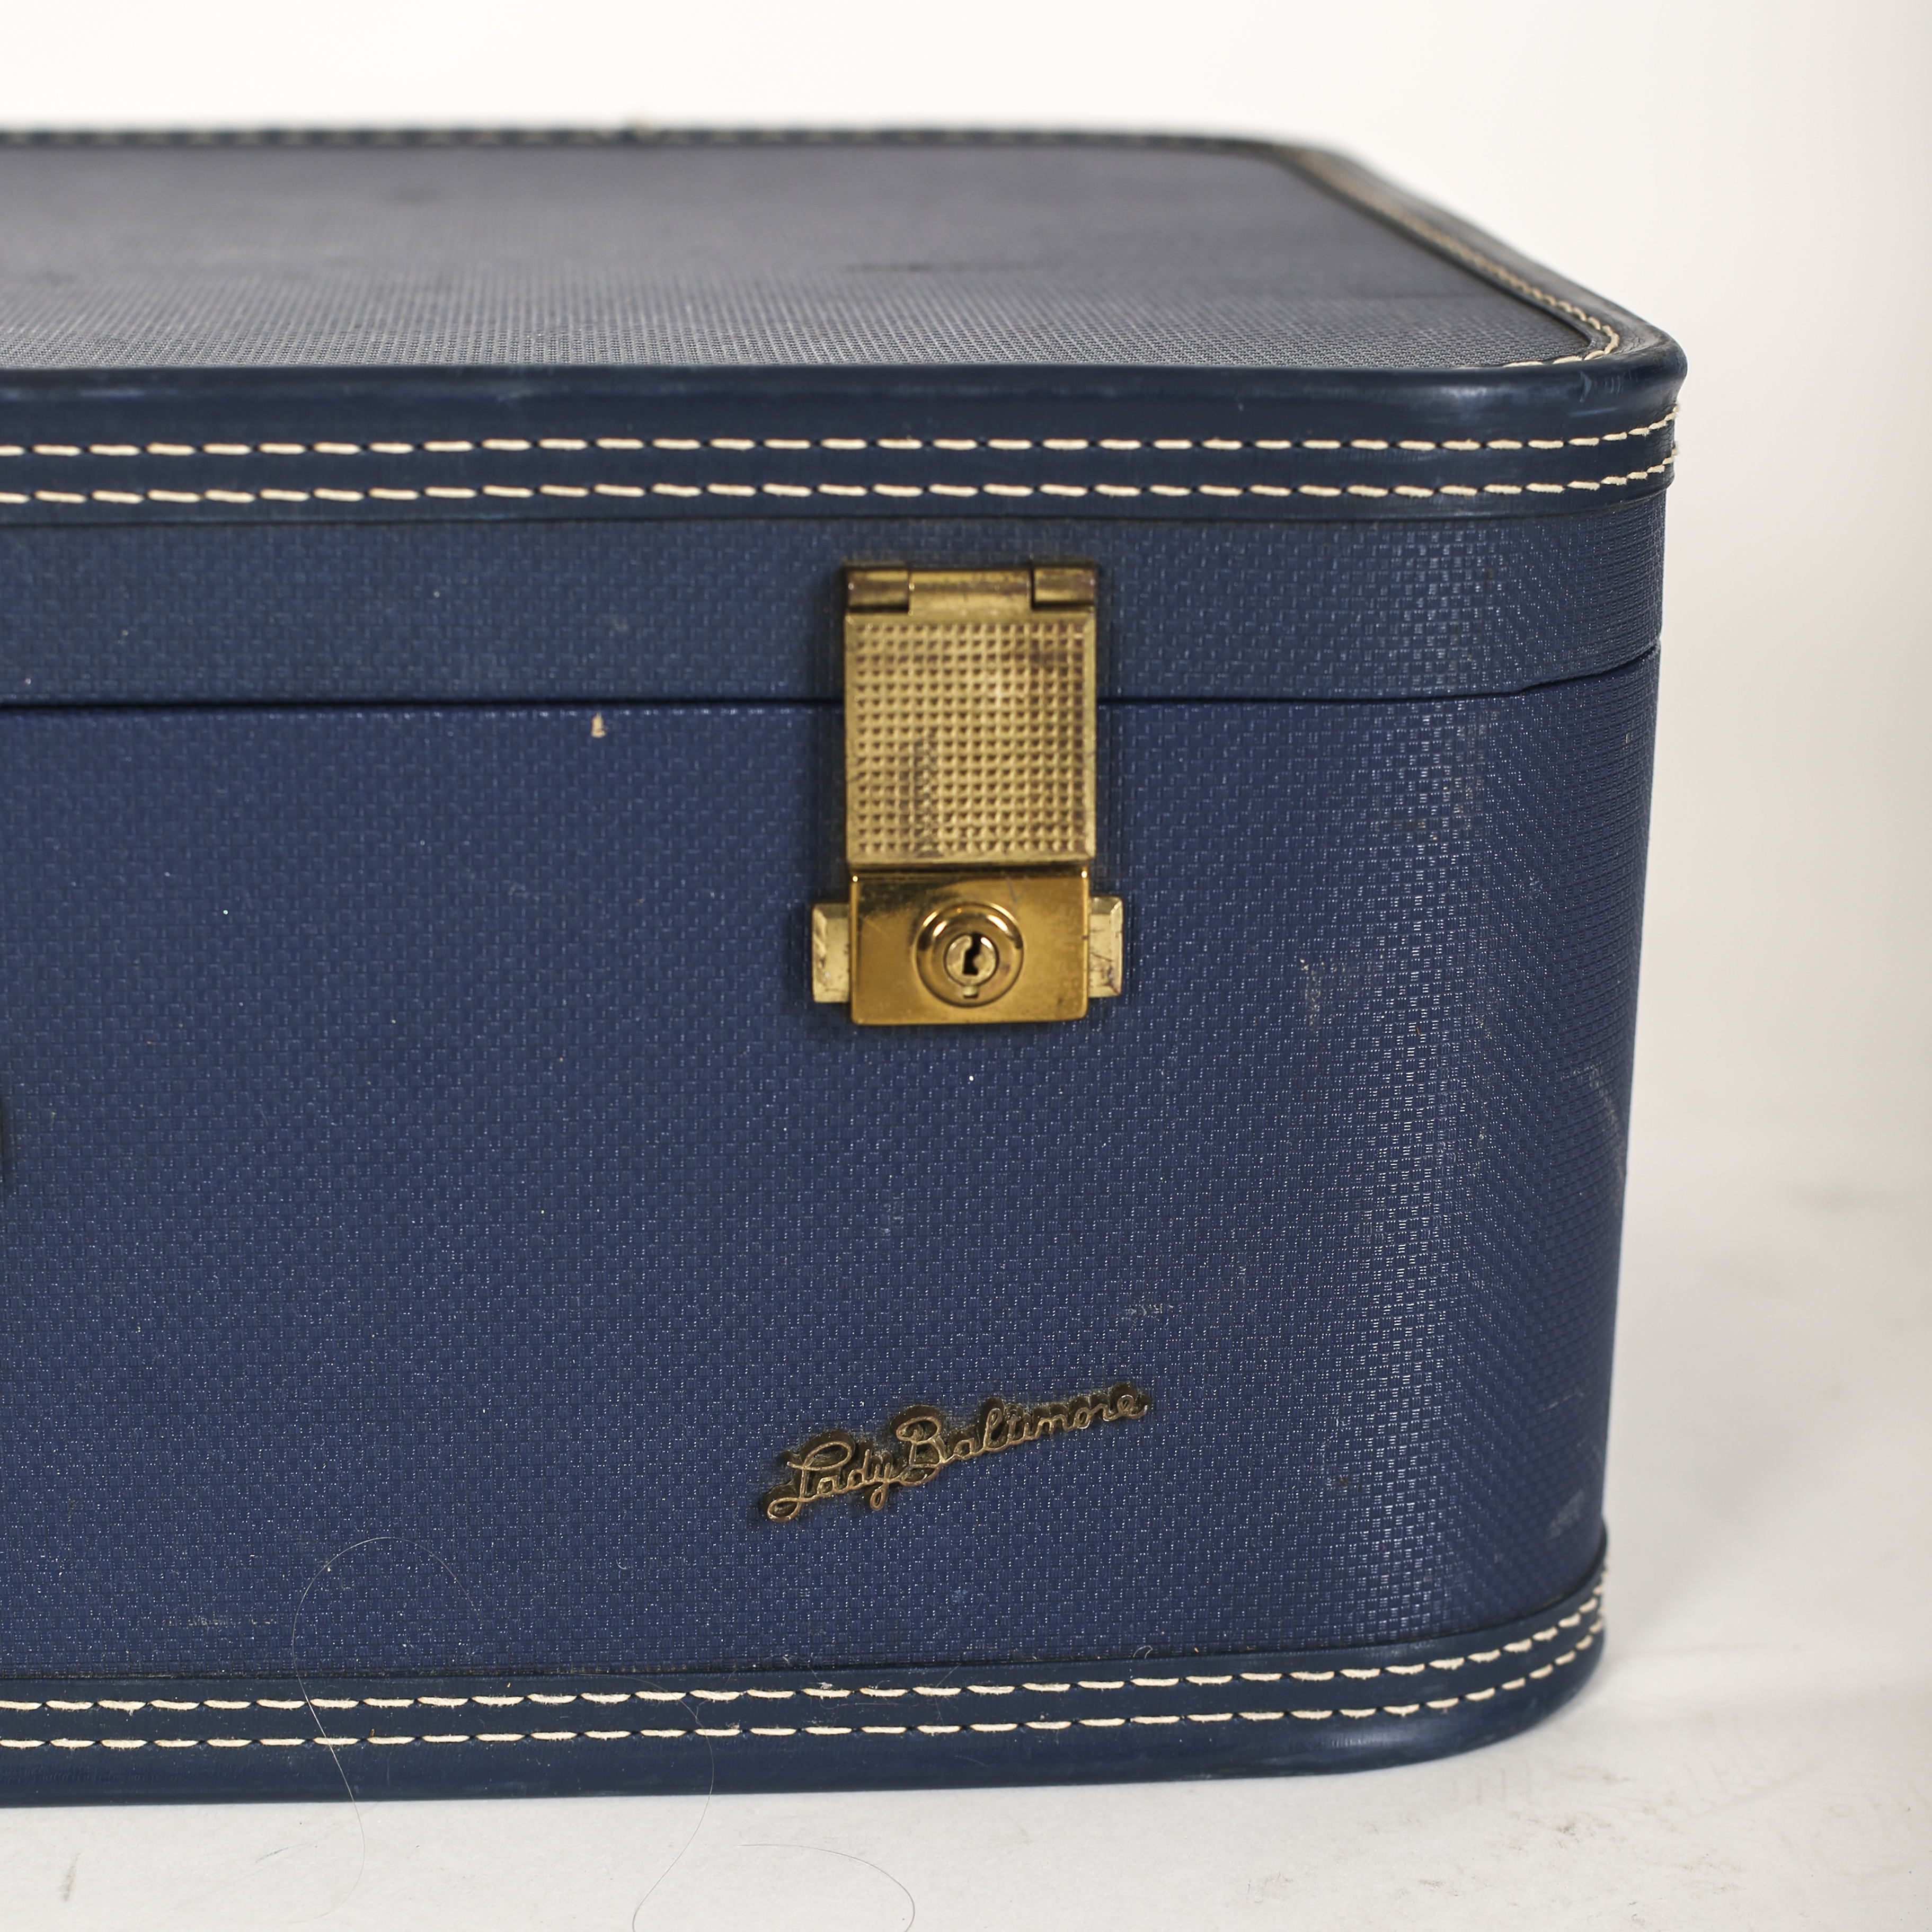 Blue Vintage Suitcase, Sold by at Home